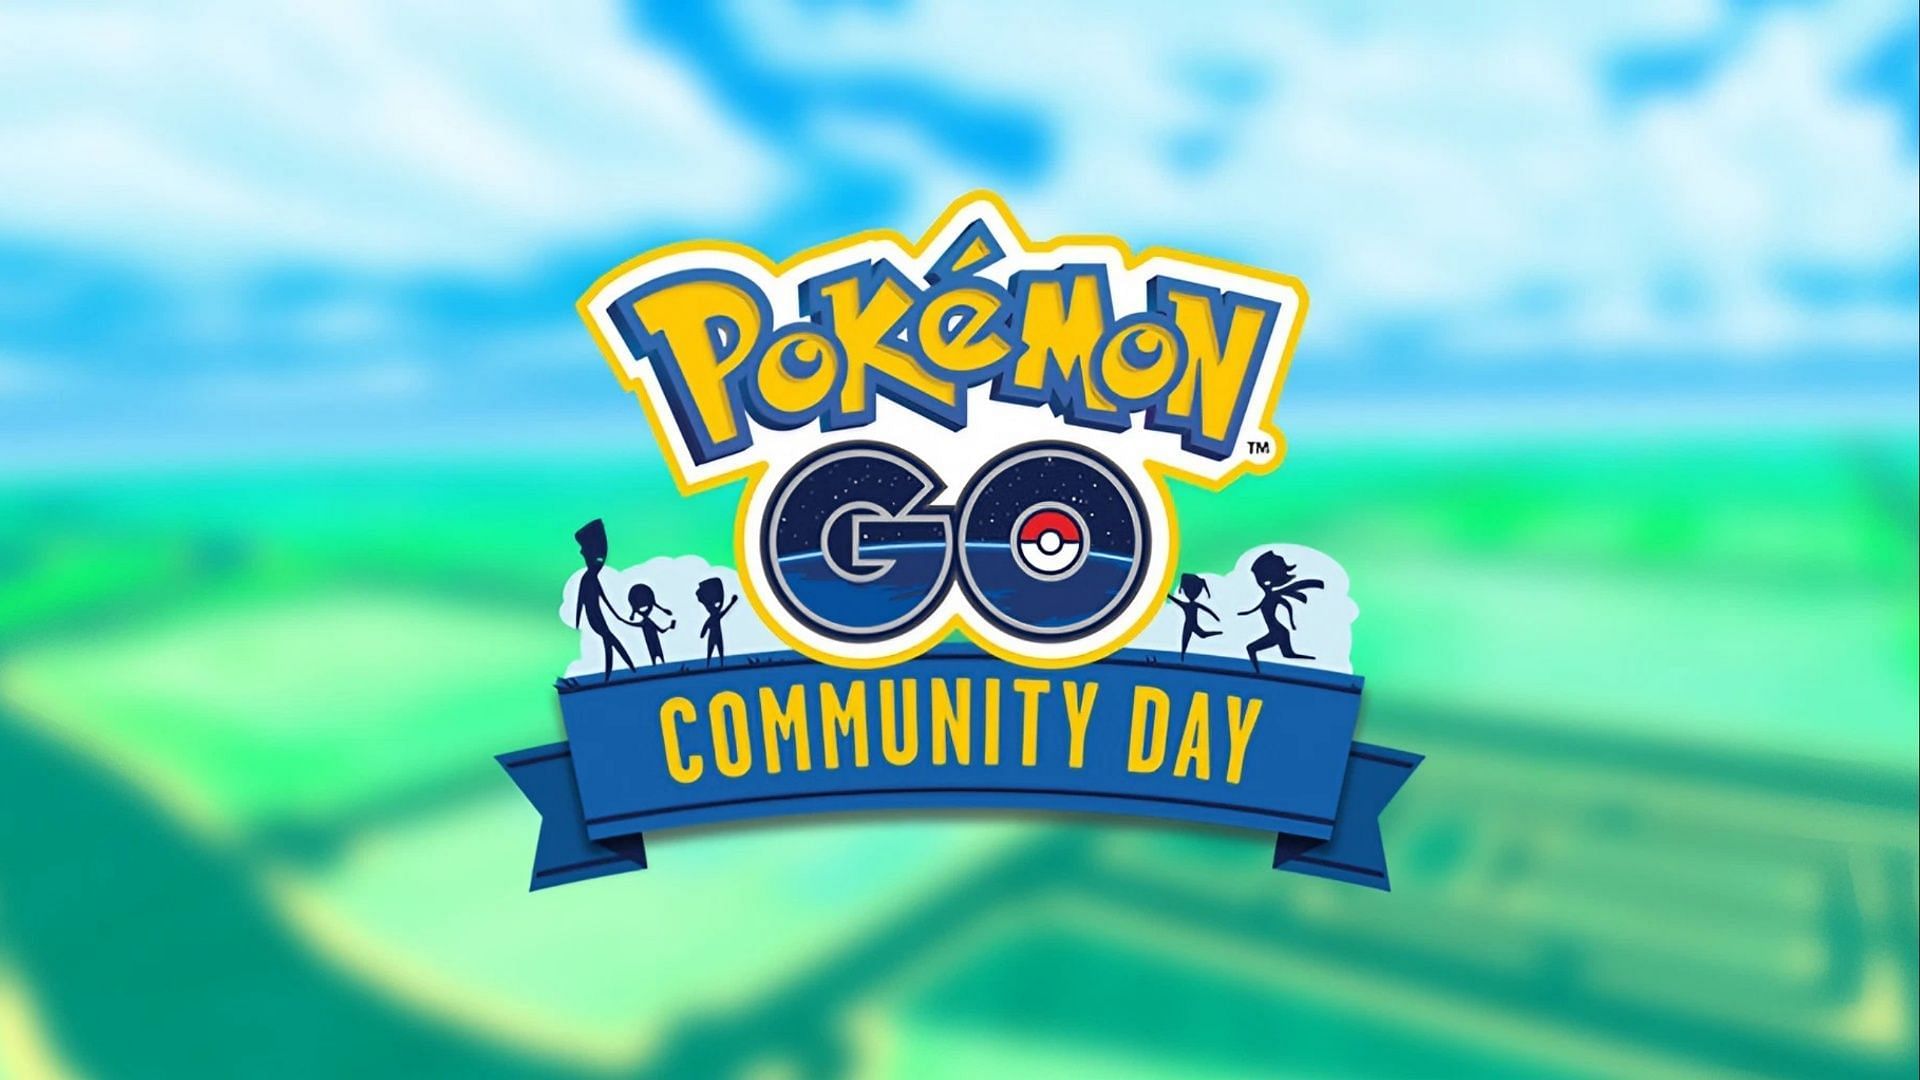 Pokemon GO - next Community Day taking place on April 25, features Abra, The GoNintendo Archives